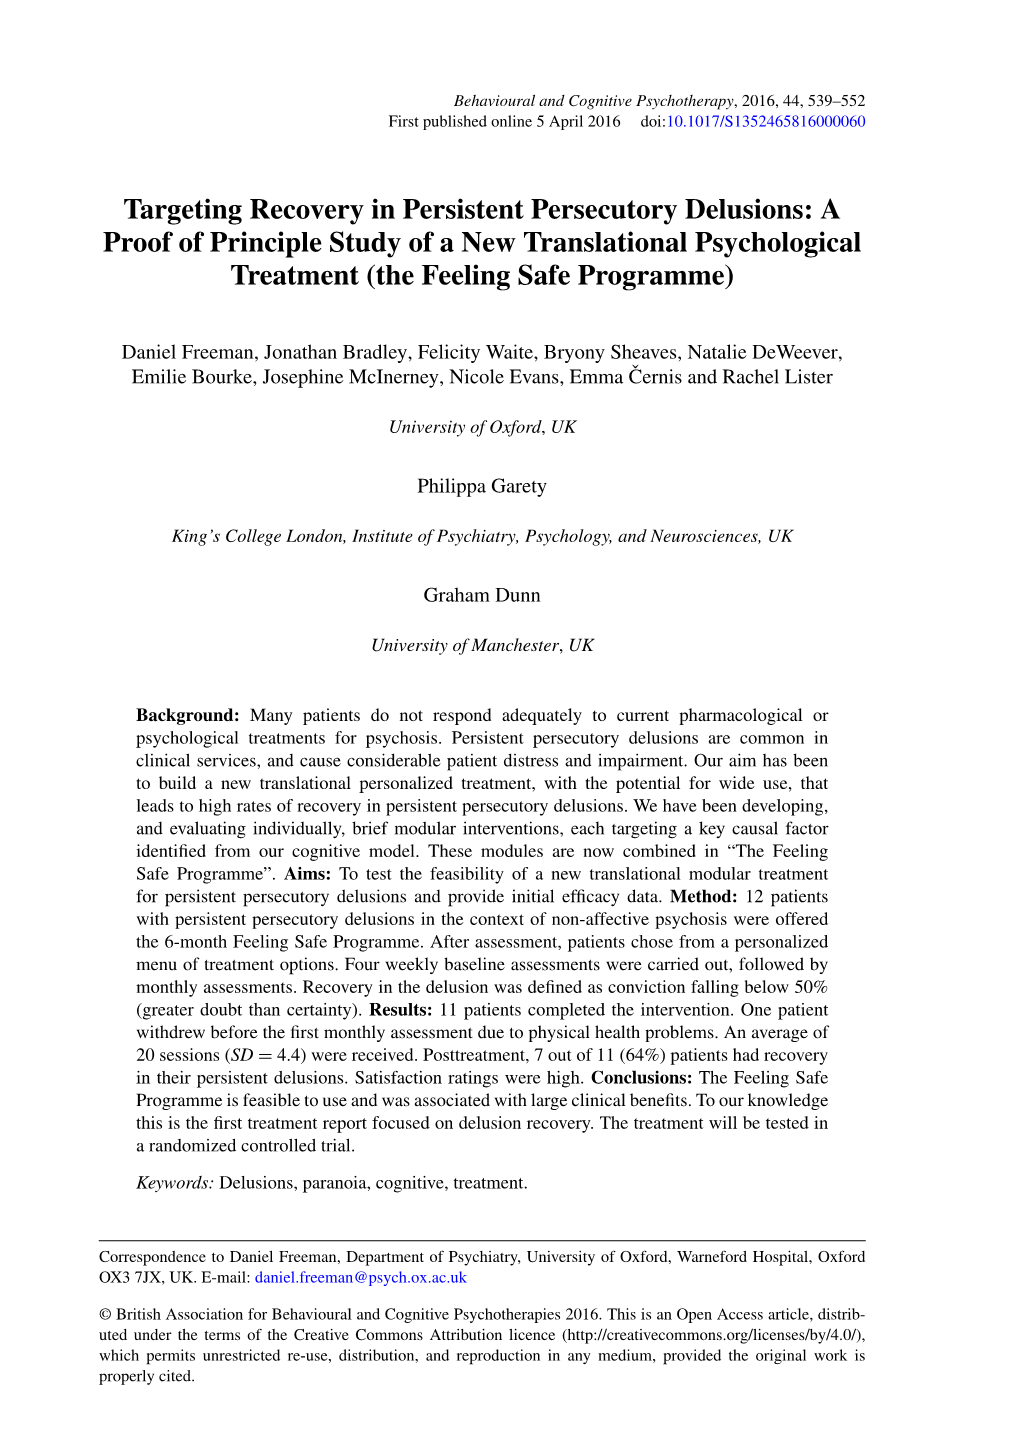 Targeting Recovery in Persistent Persecutory Delusions: a Proof of Principle Study of a New Translational Psychological Treatment (The Feeling Safe Programme)